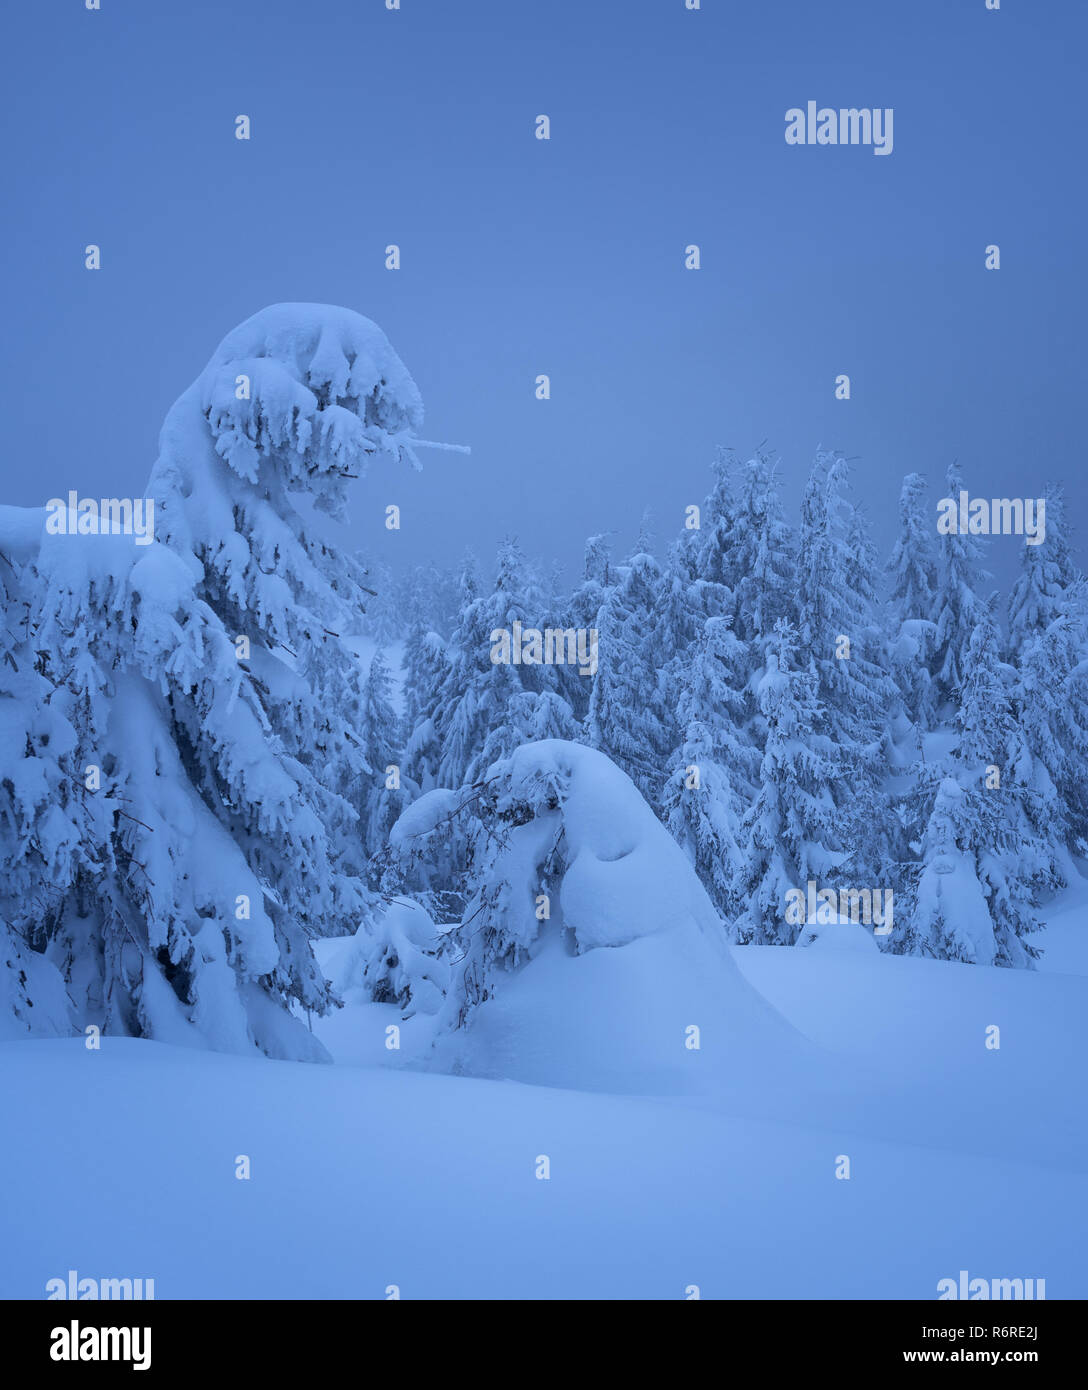 Wonderful winter view with snowdrifts in the spruce forest. Trees covered with snow. Dusky Scene in Blue Stock Photo